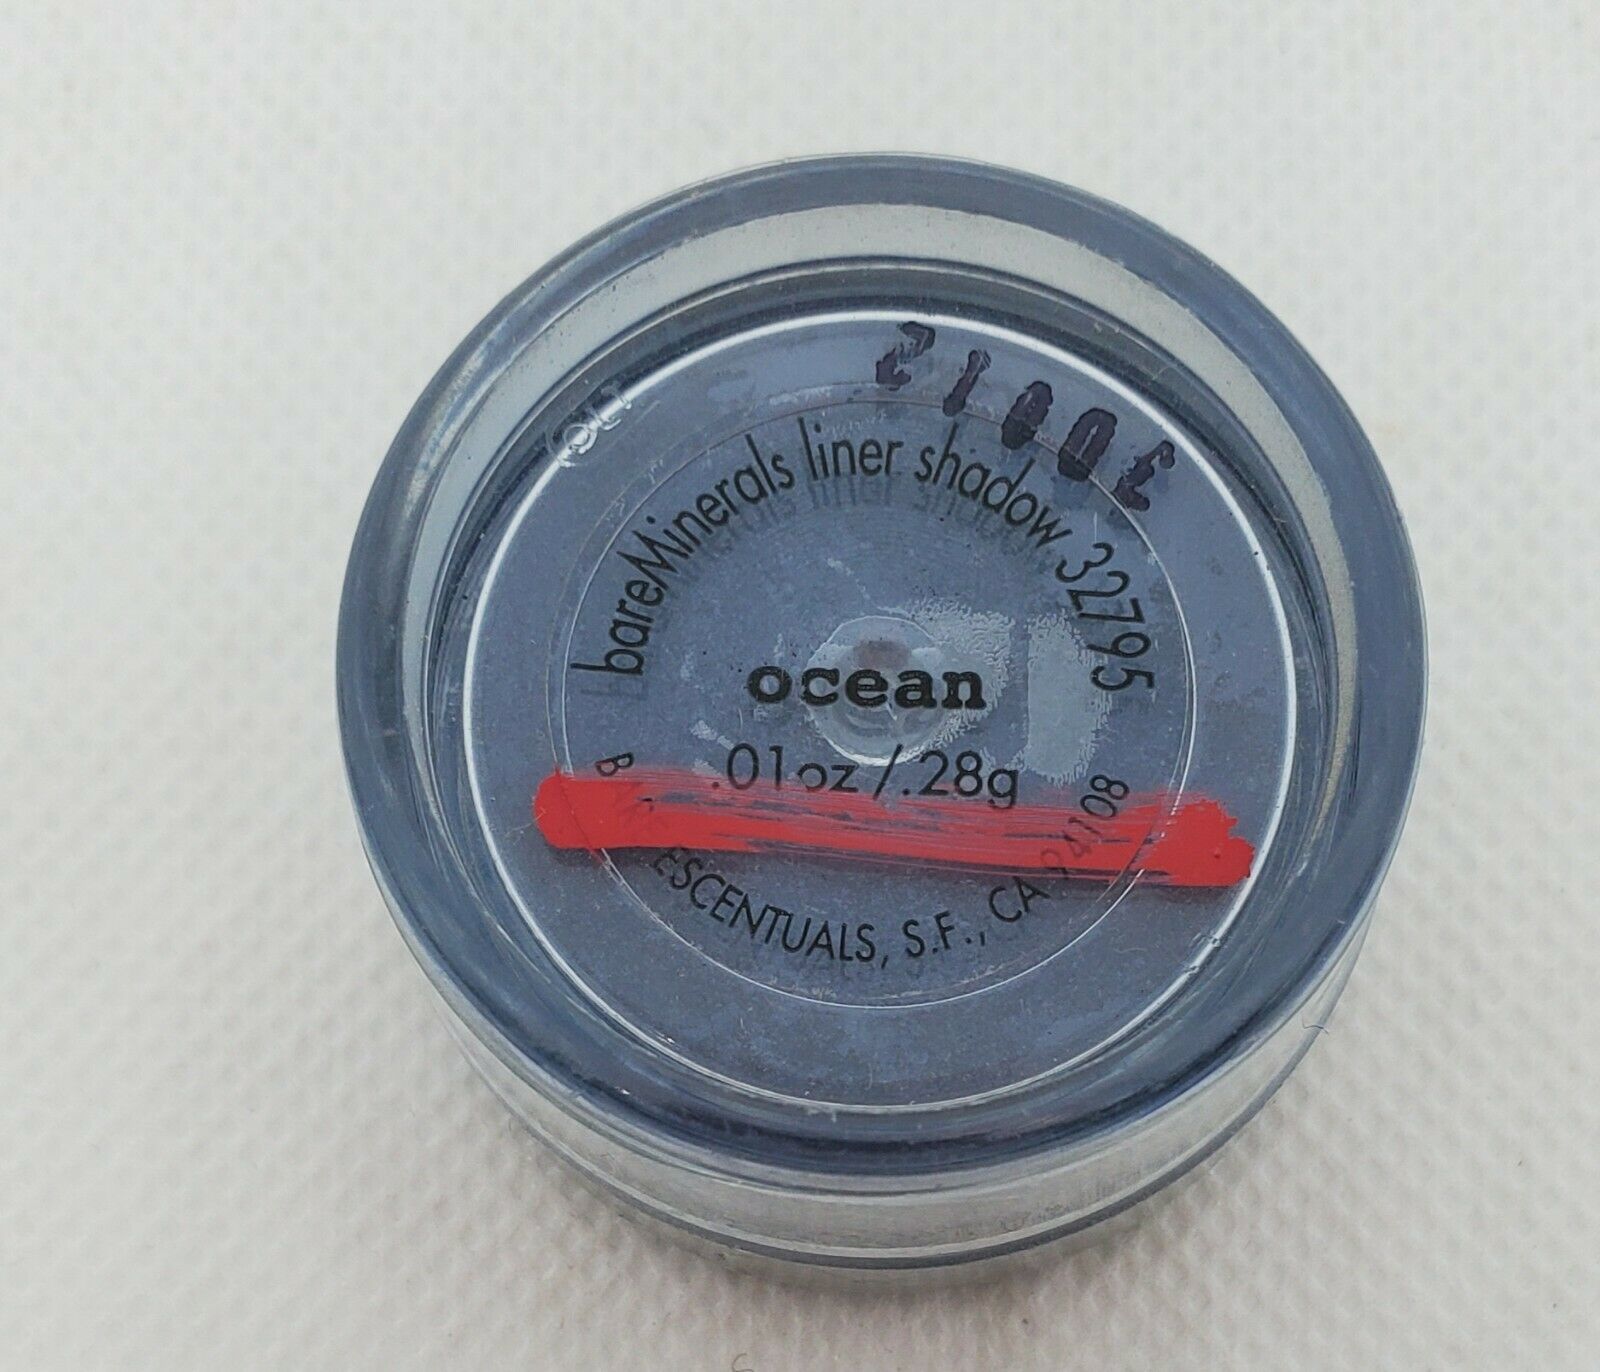 Primary image for New Sealed bareMinerals Liner Shadow Eye Liner in Ocean 32795 .57g Loose Powder